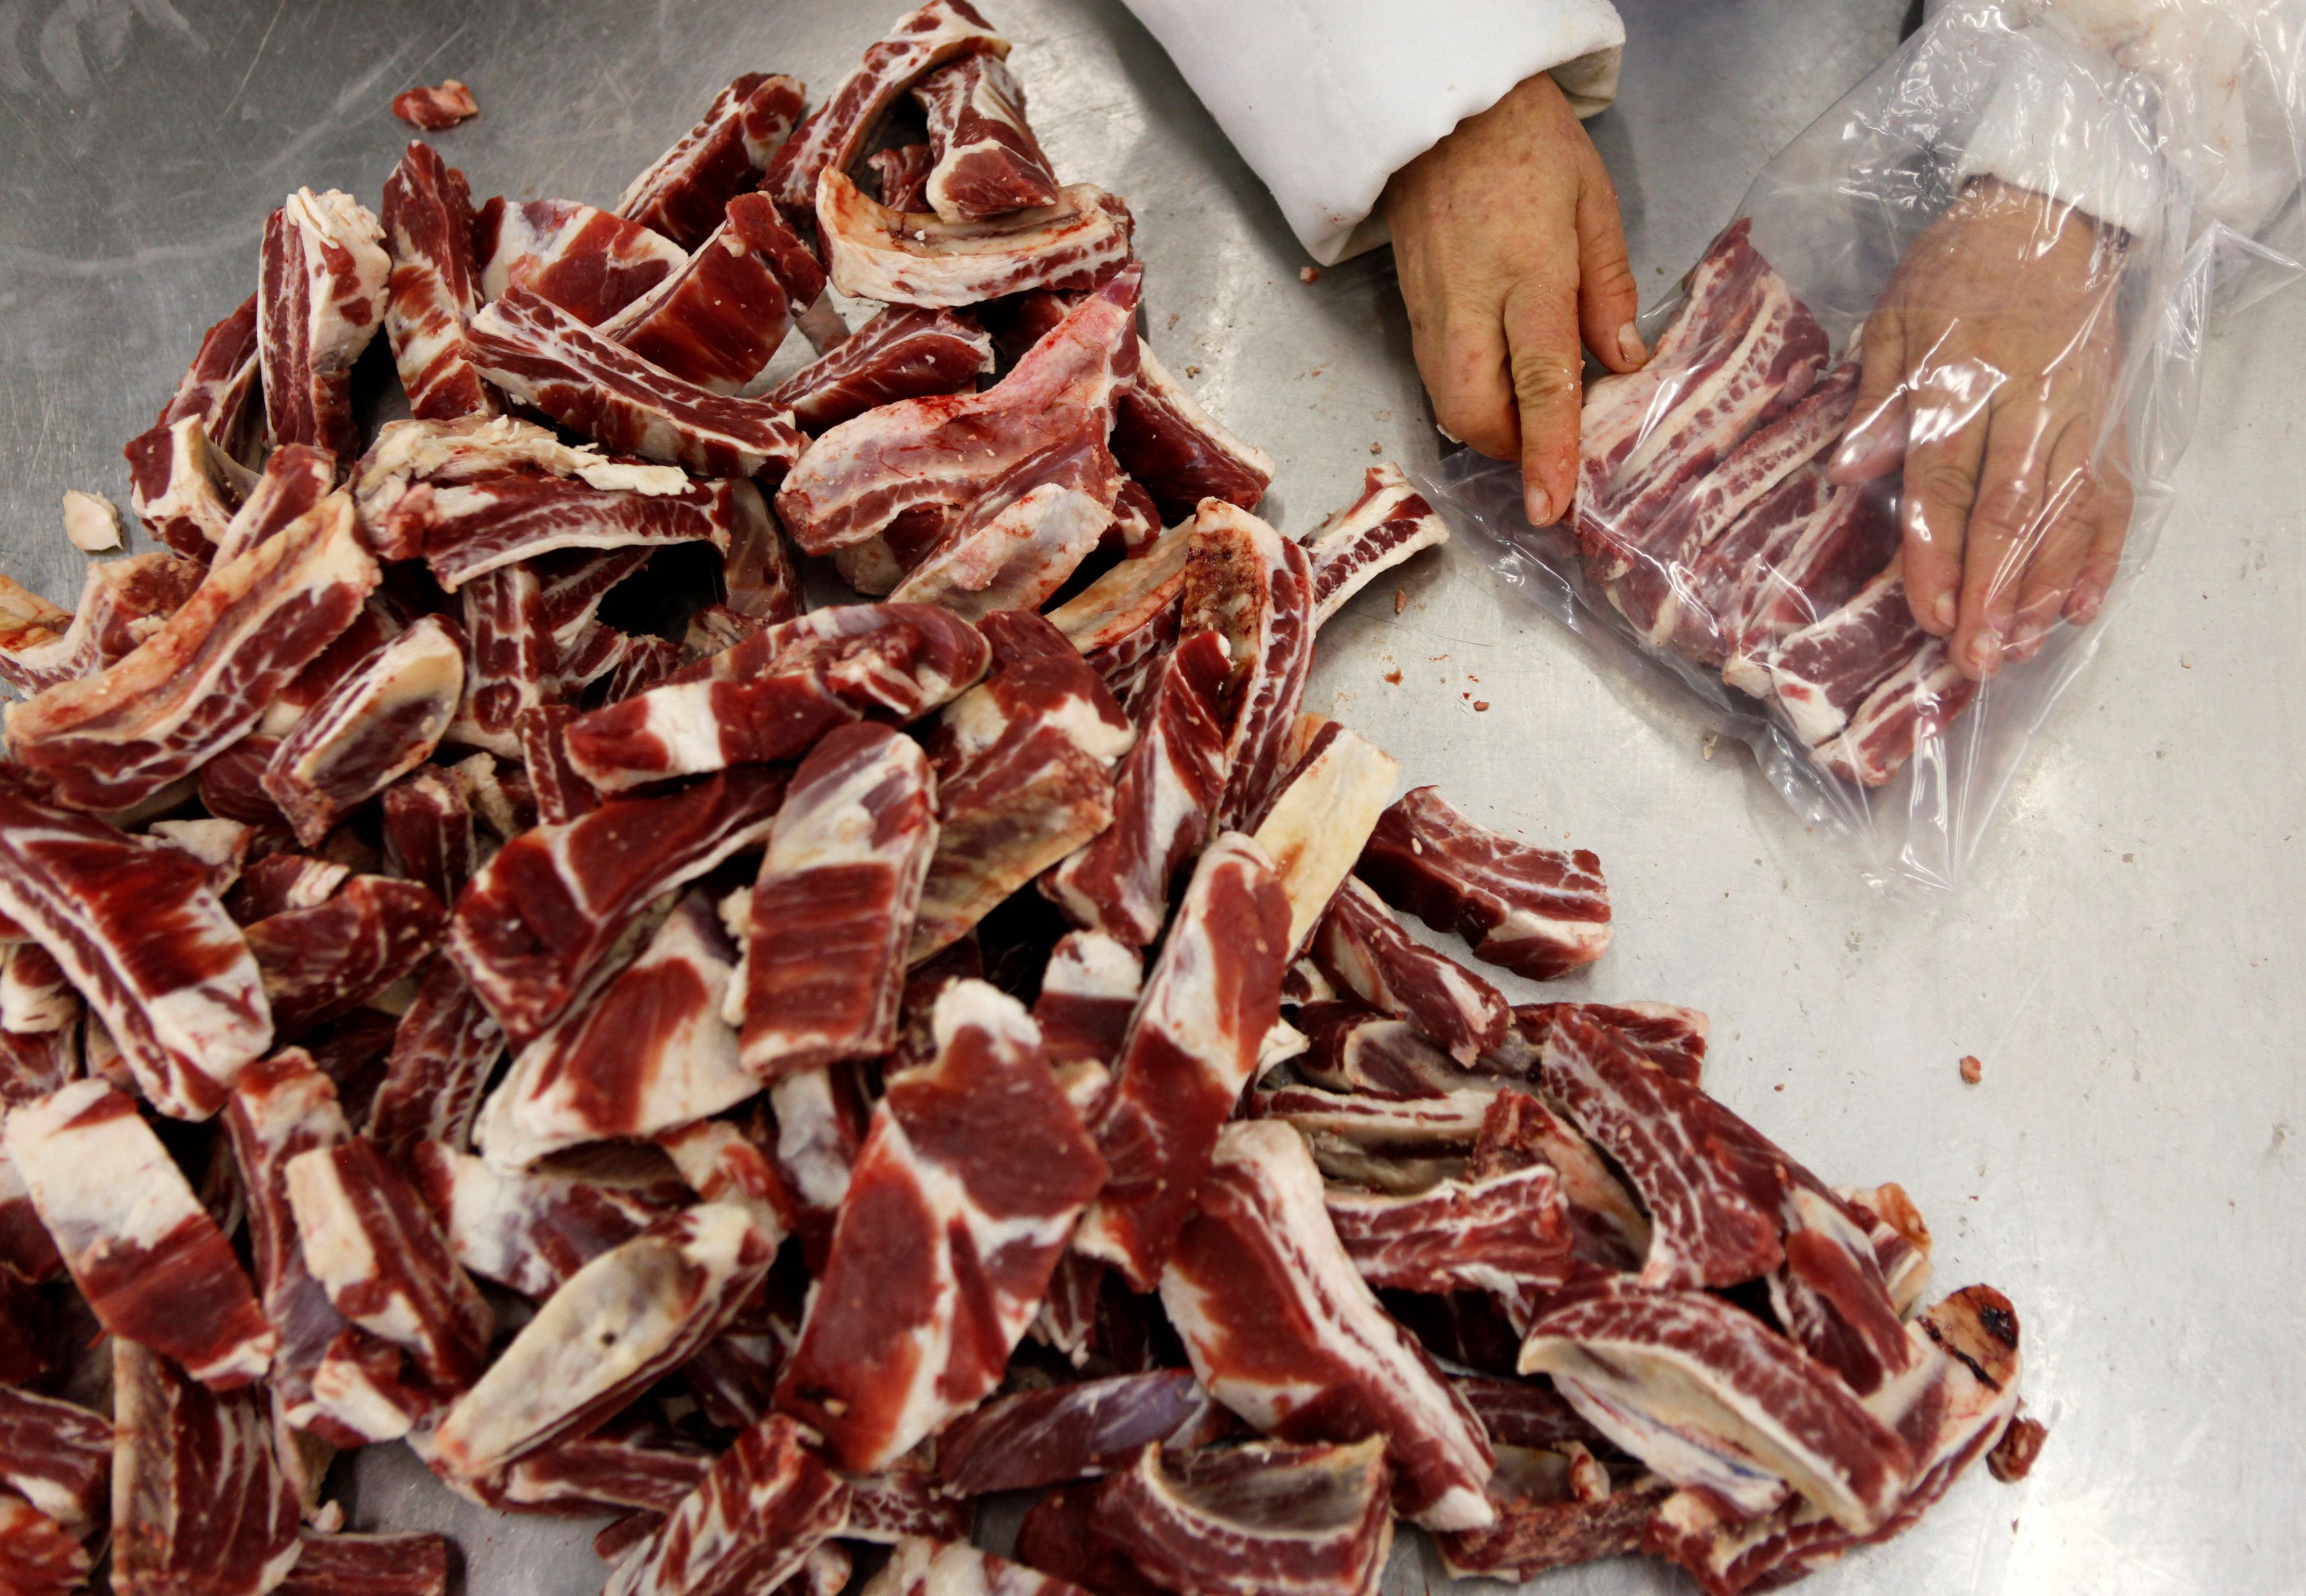 A worker packs beef at the Marfrig Group slaughter house in Promissao